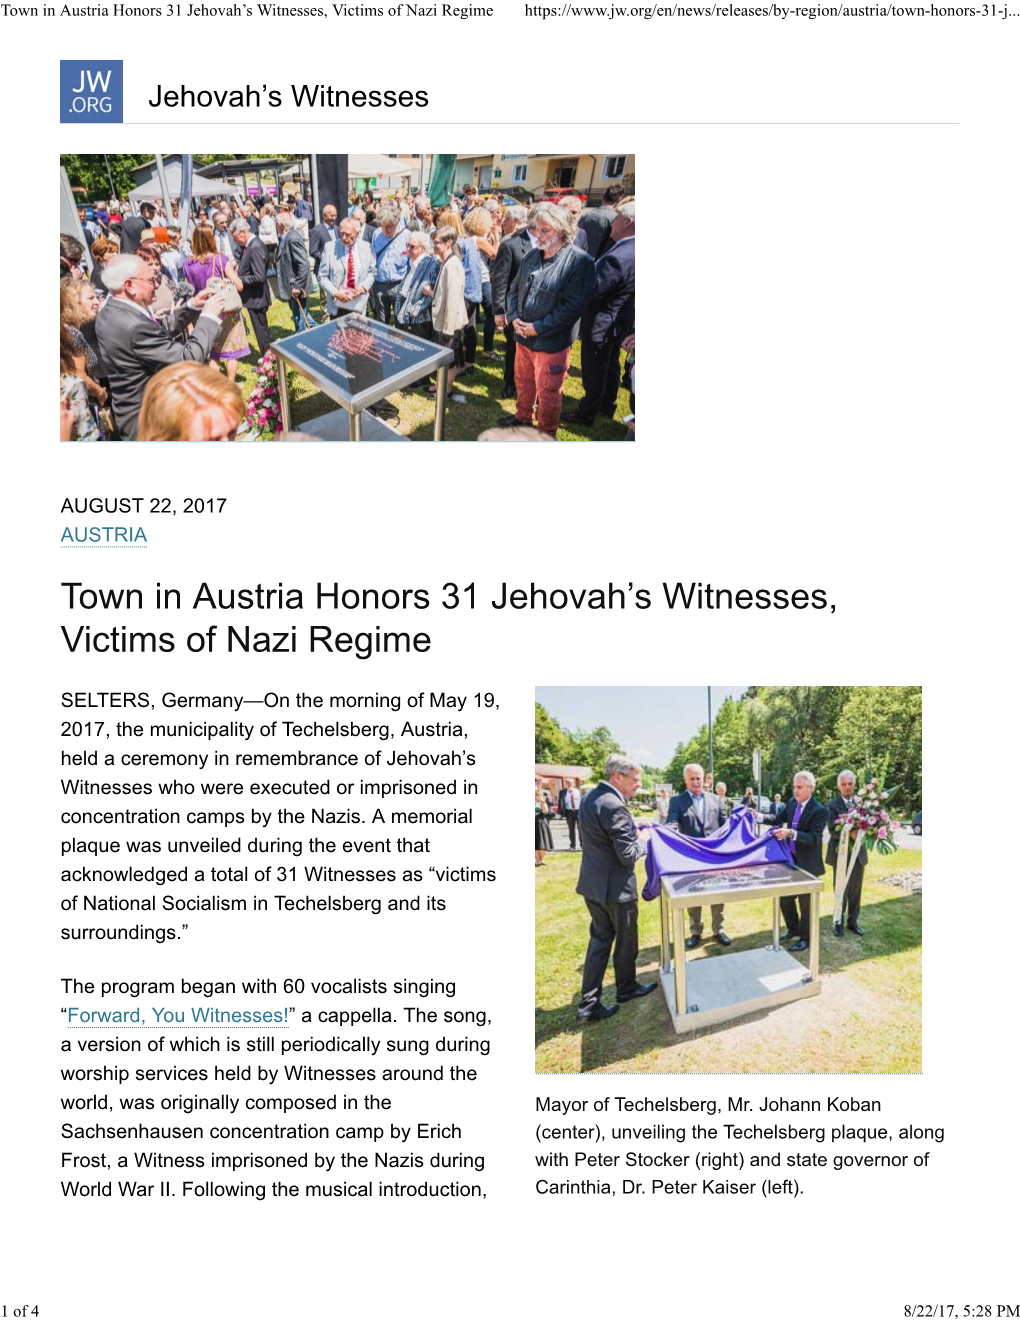 Town in Austria Honors 31 Jehovah's Witnesses, Victims of Nazi